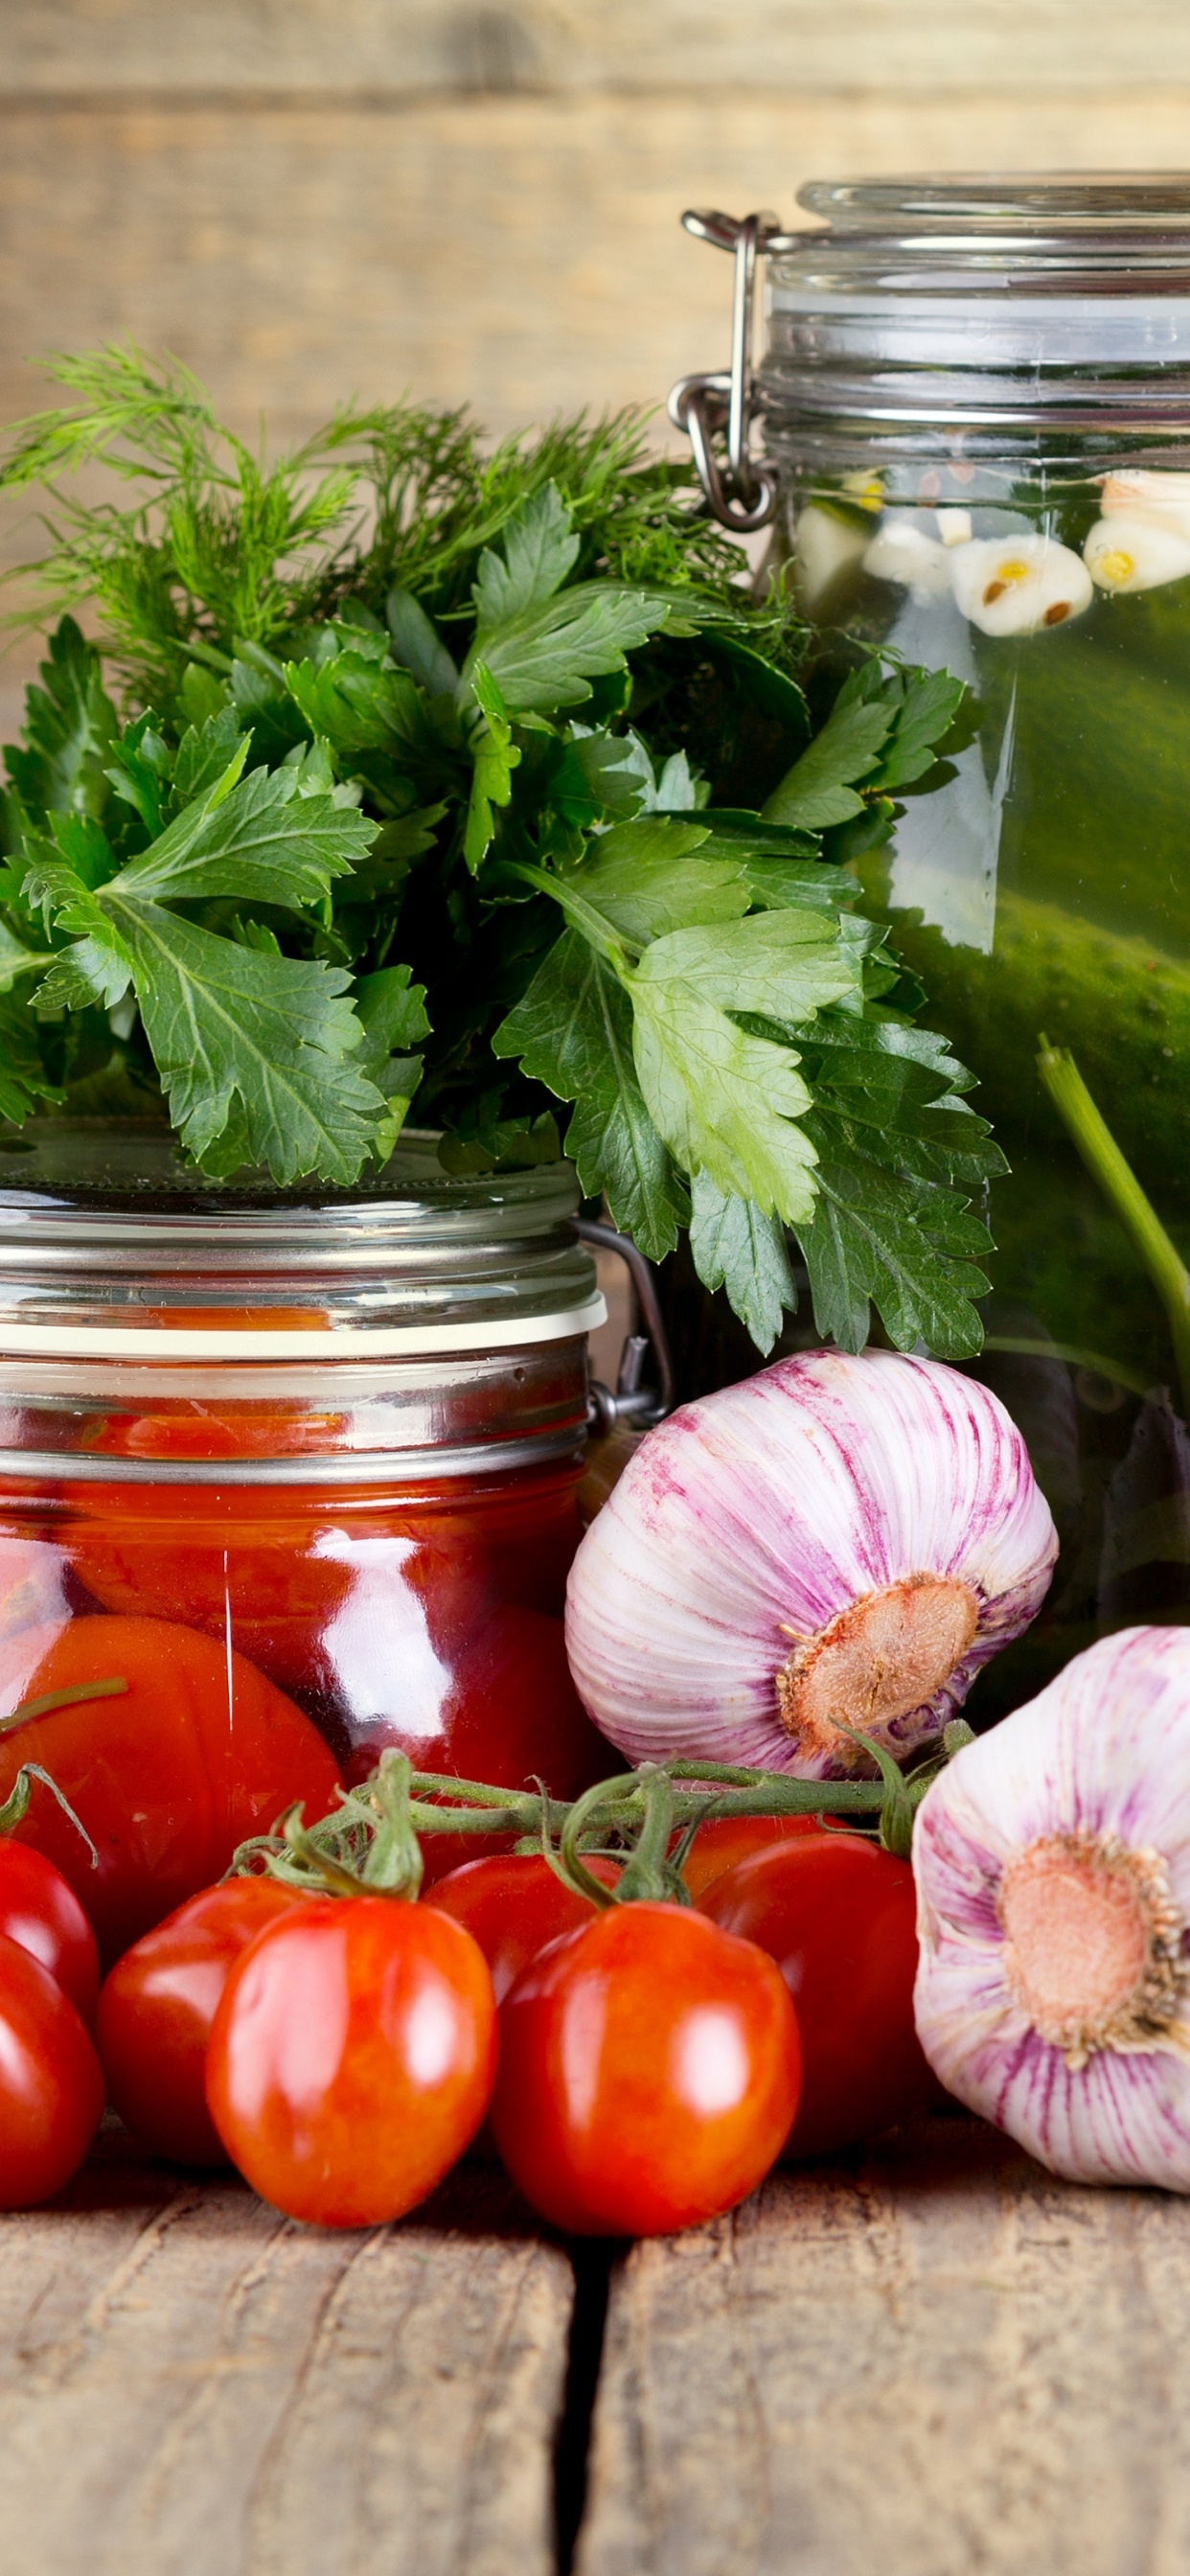 Red Tomatoes and Green Leaves in Clear Glass Jar. Wallpaper in 1242x2688 Resolution